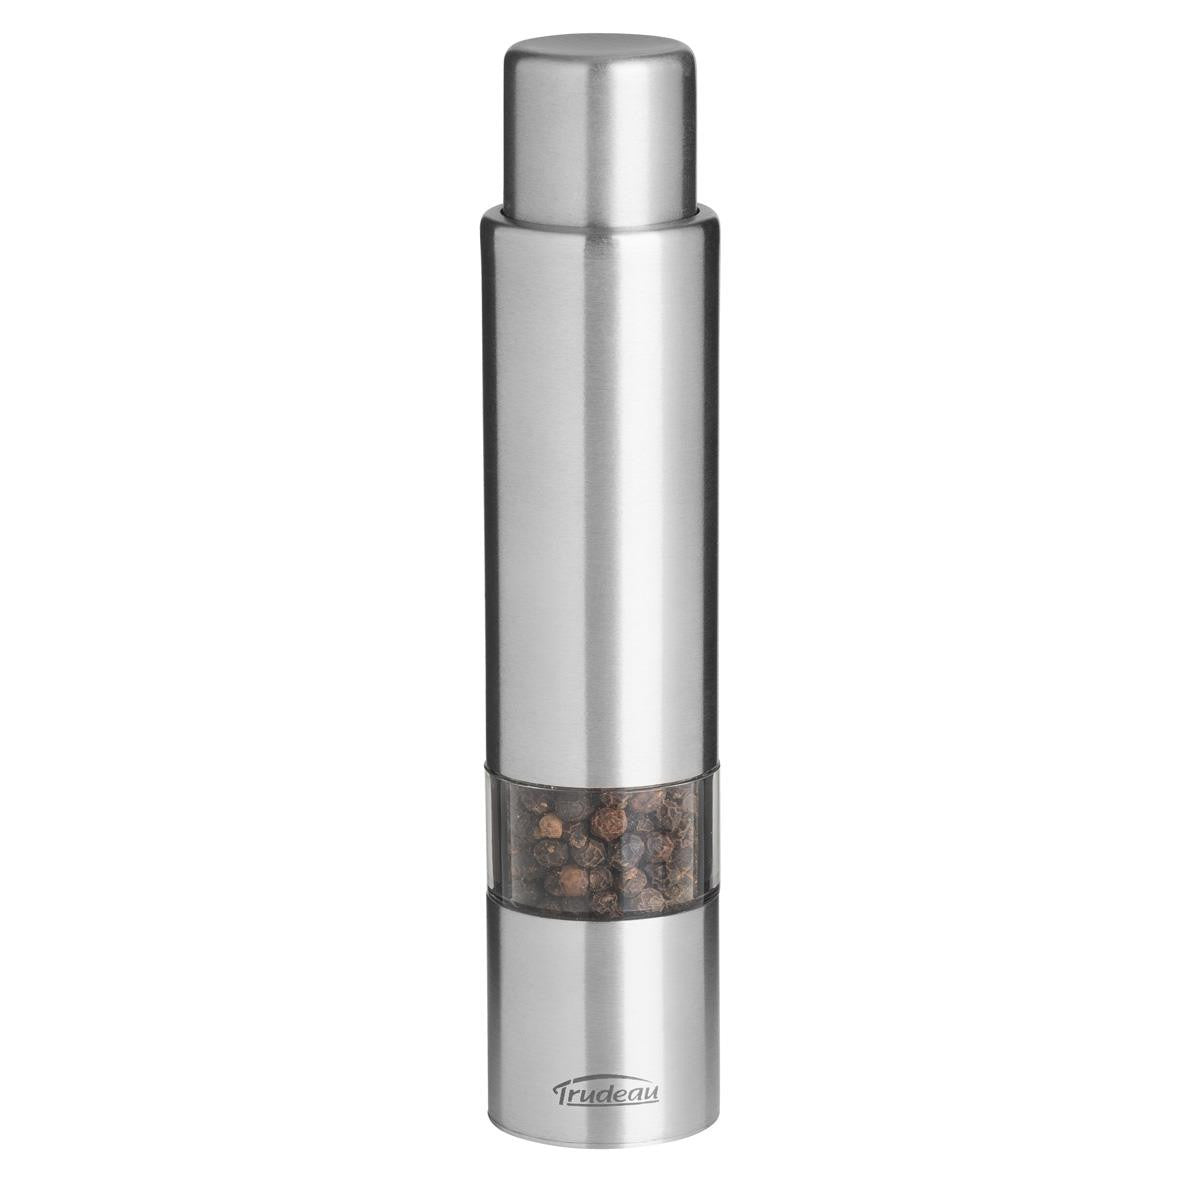 Trudeau One Hand Stainless Steel Pepper Mill